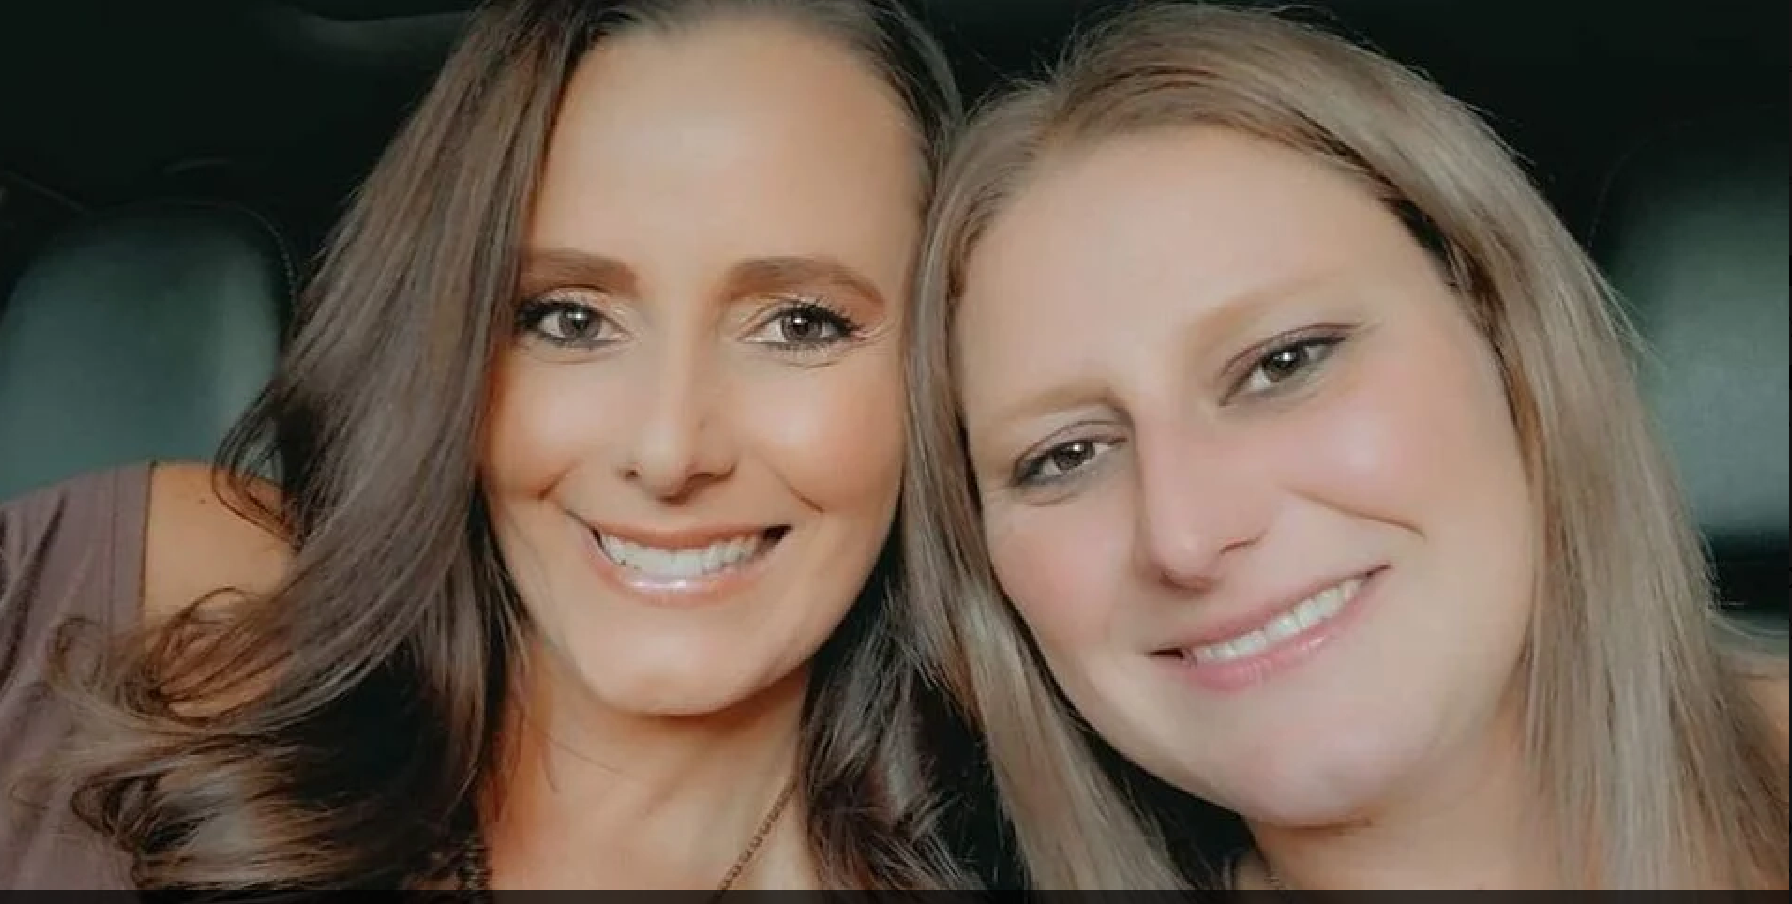 Stephanie Clark, left, lost her sister Ashley Paugh in the Colorado Springs nightclub massacre; she said on Monday that Ashley’s daughter, 11, wanted to follow in her mother’s footsteps and forgive the shooter